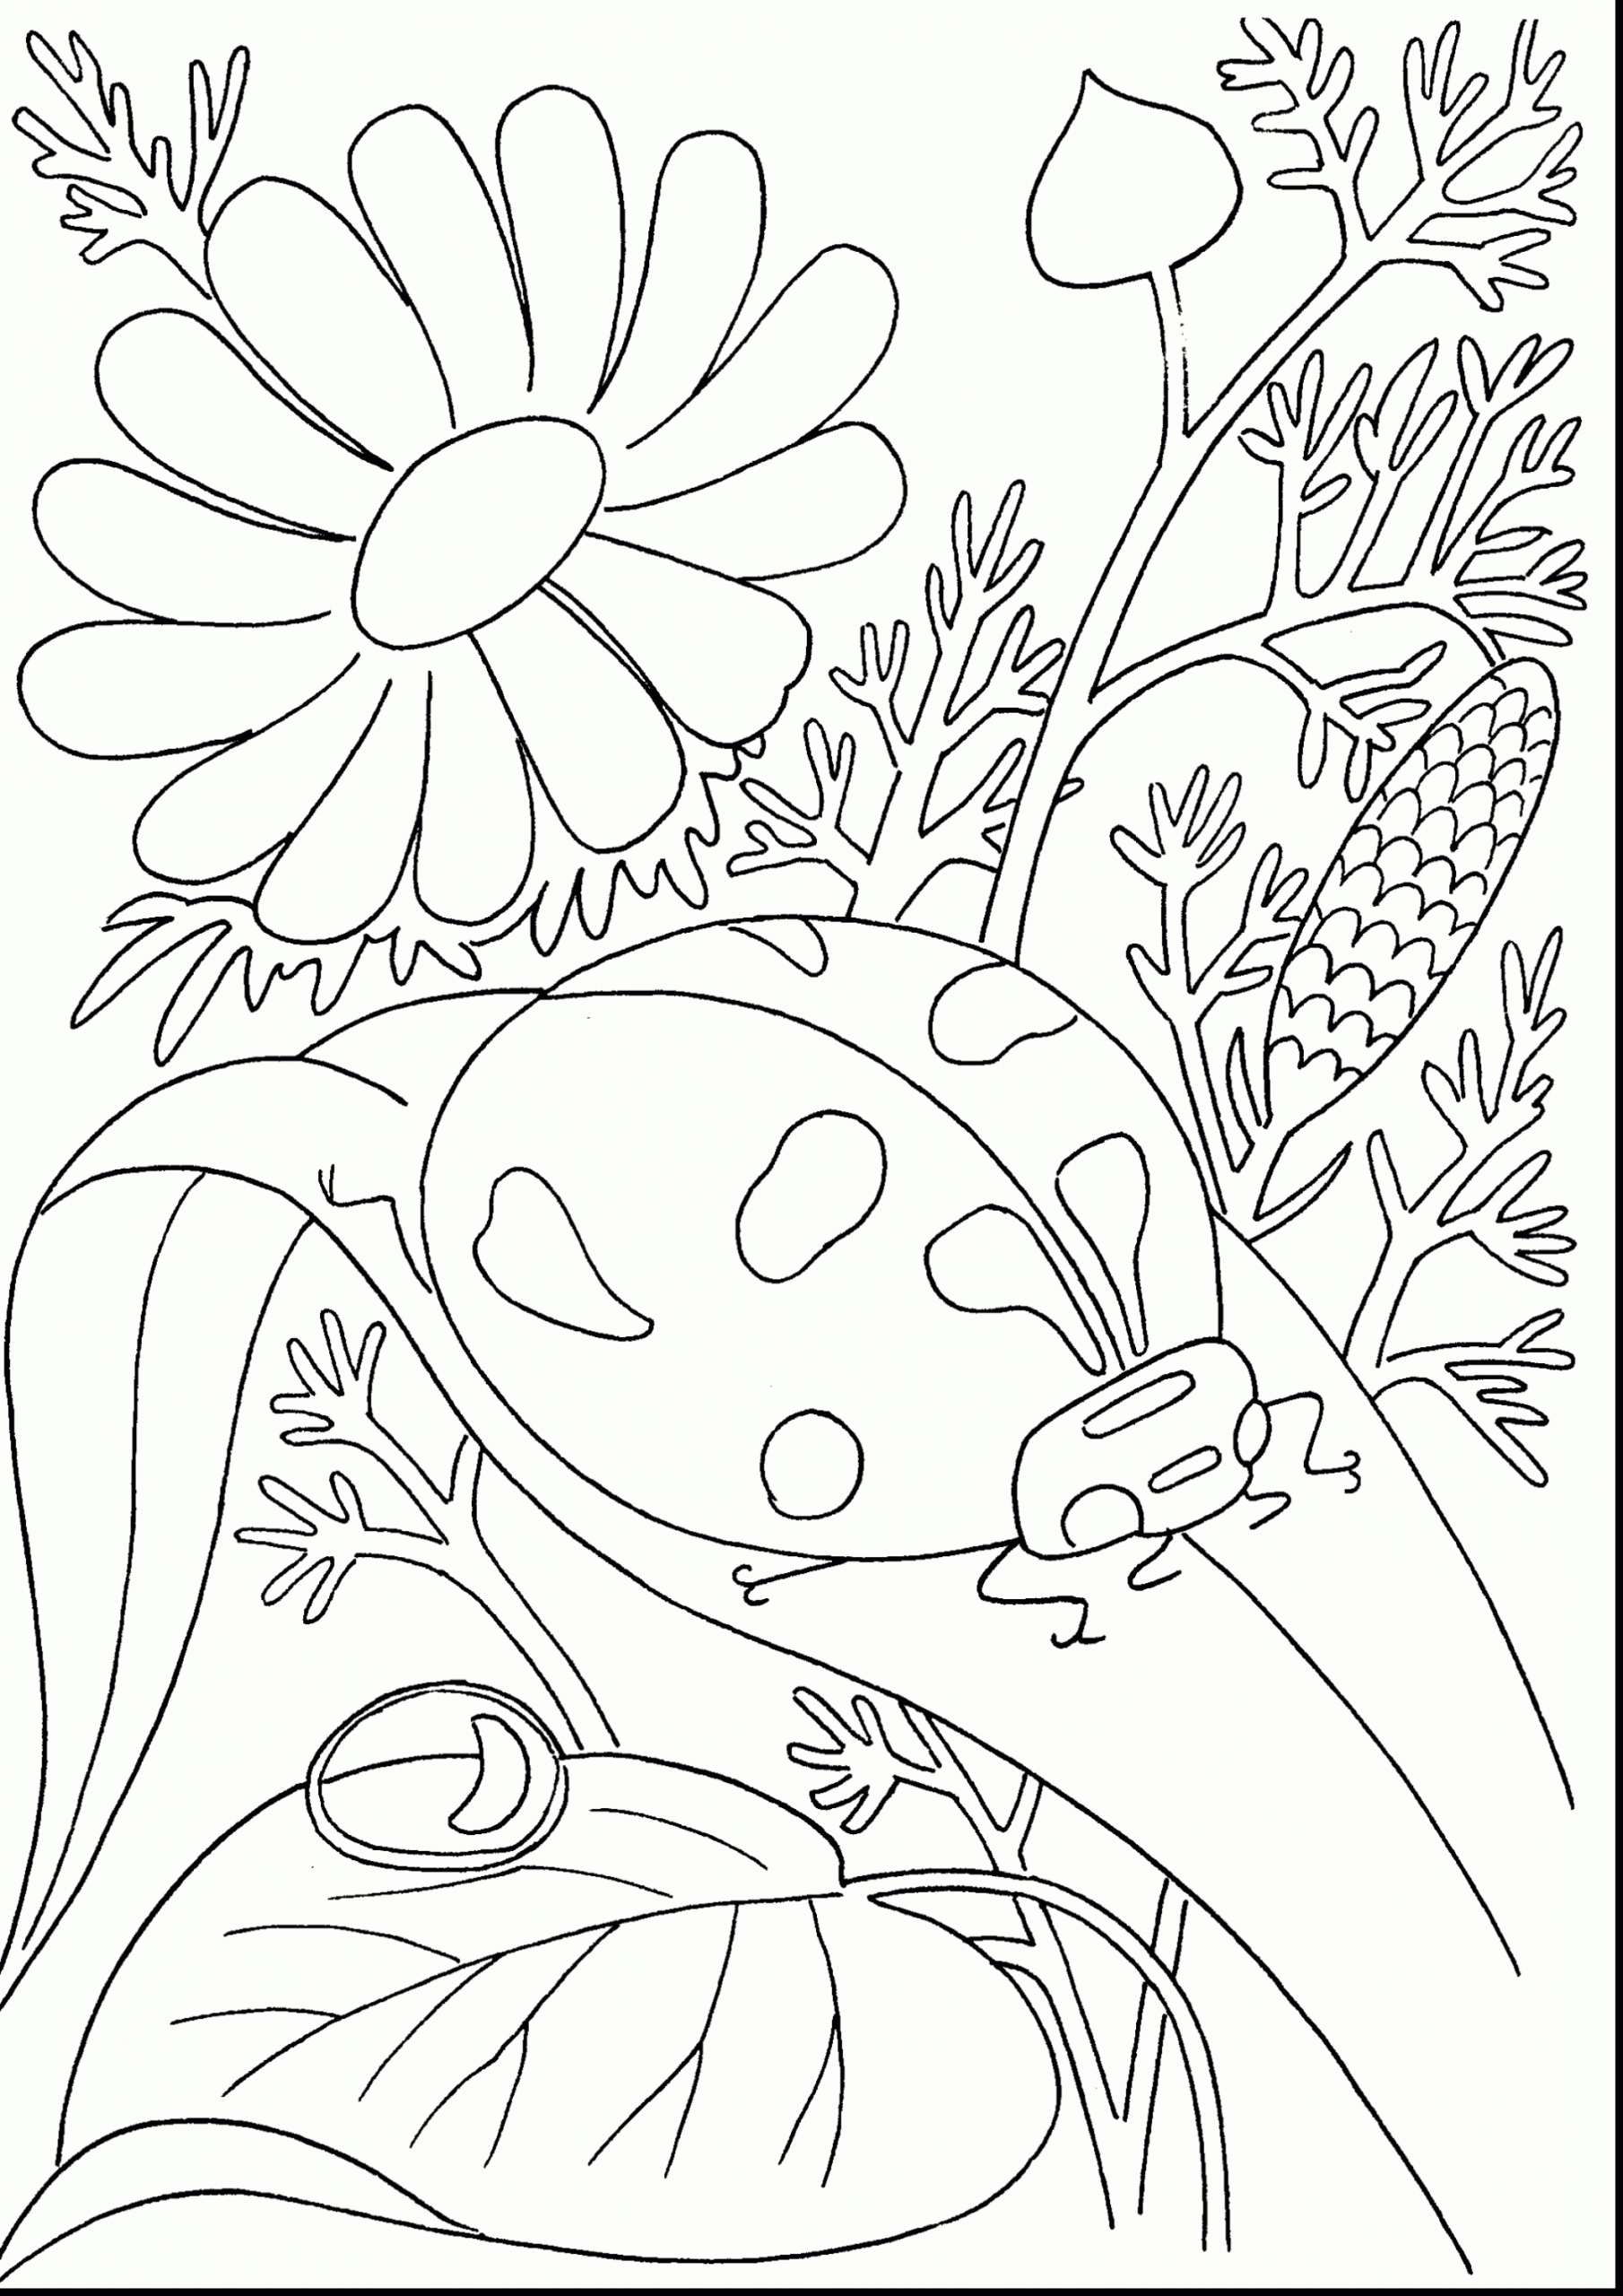 Coloring Pages : Coloring Page For Kids New Wonderful Spring ...